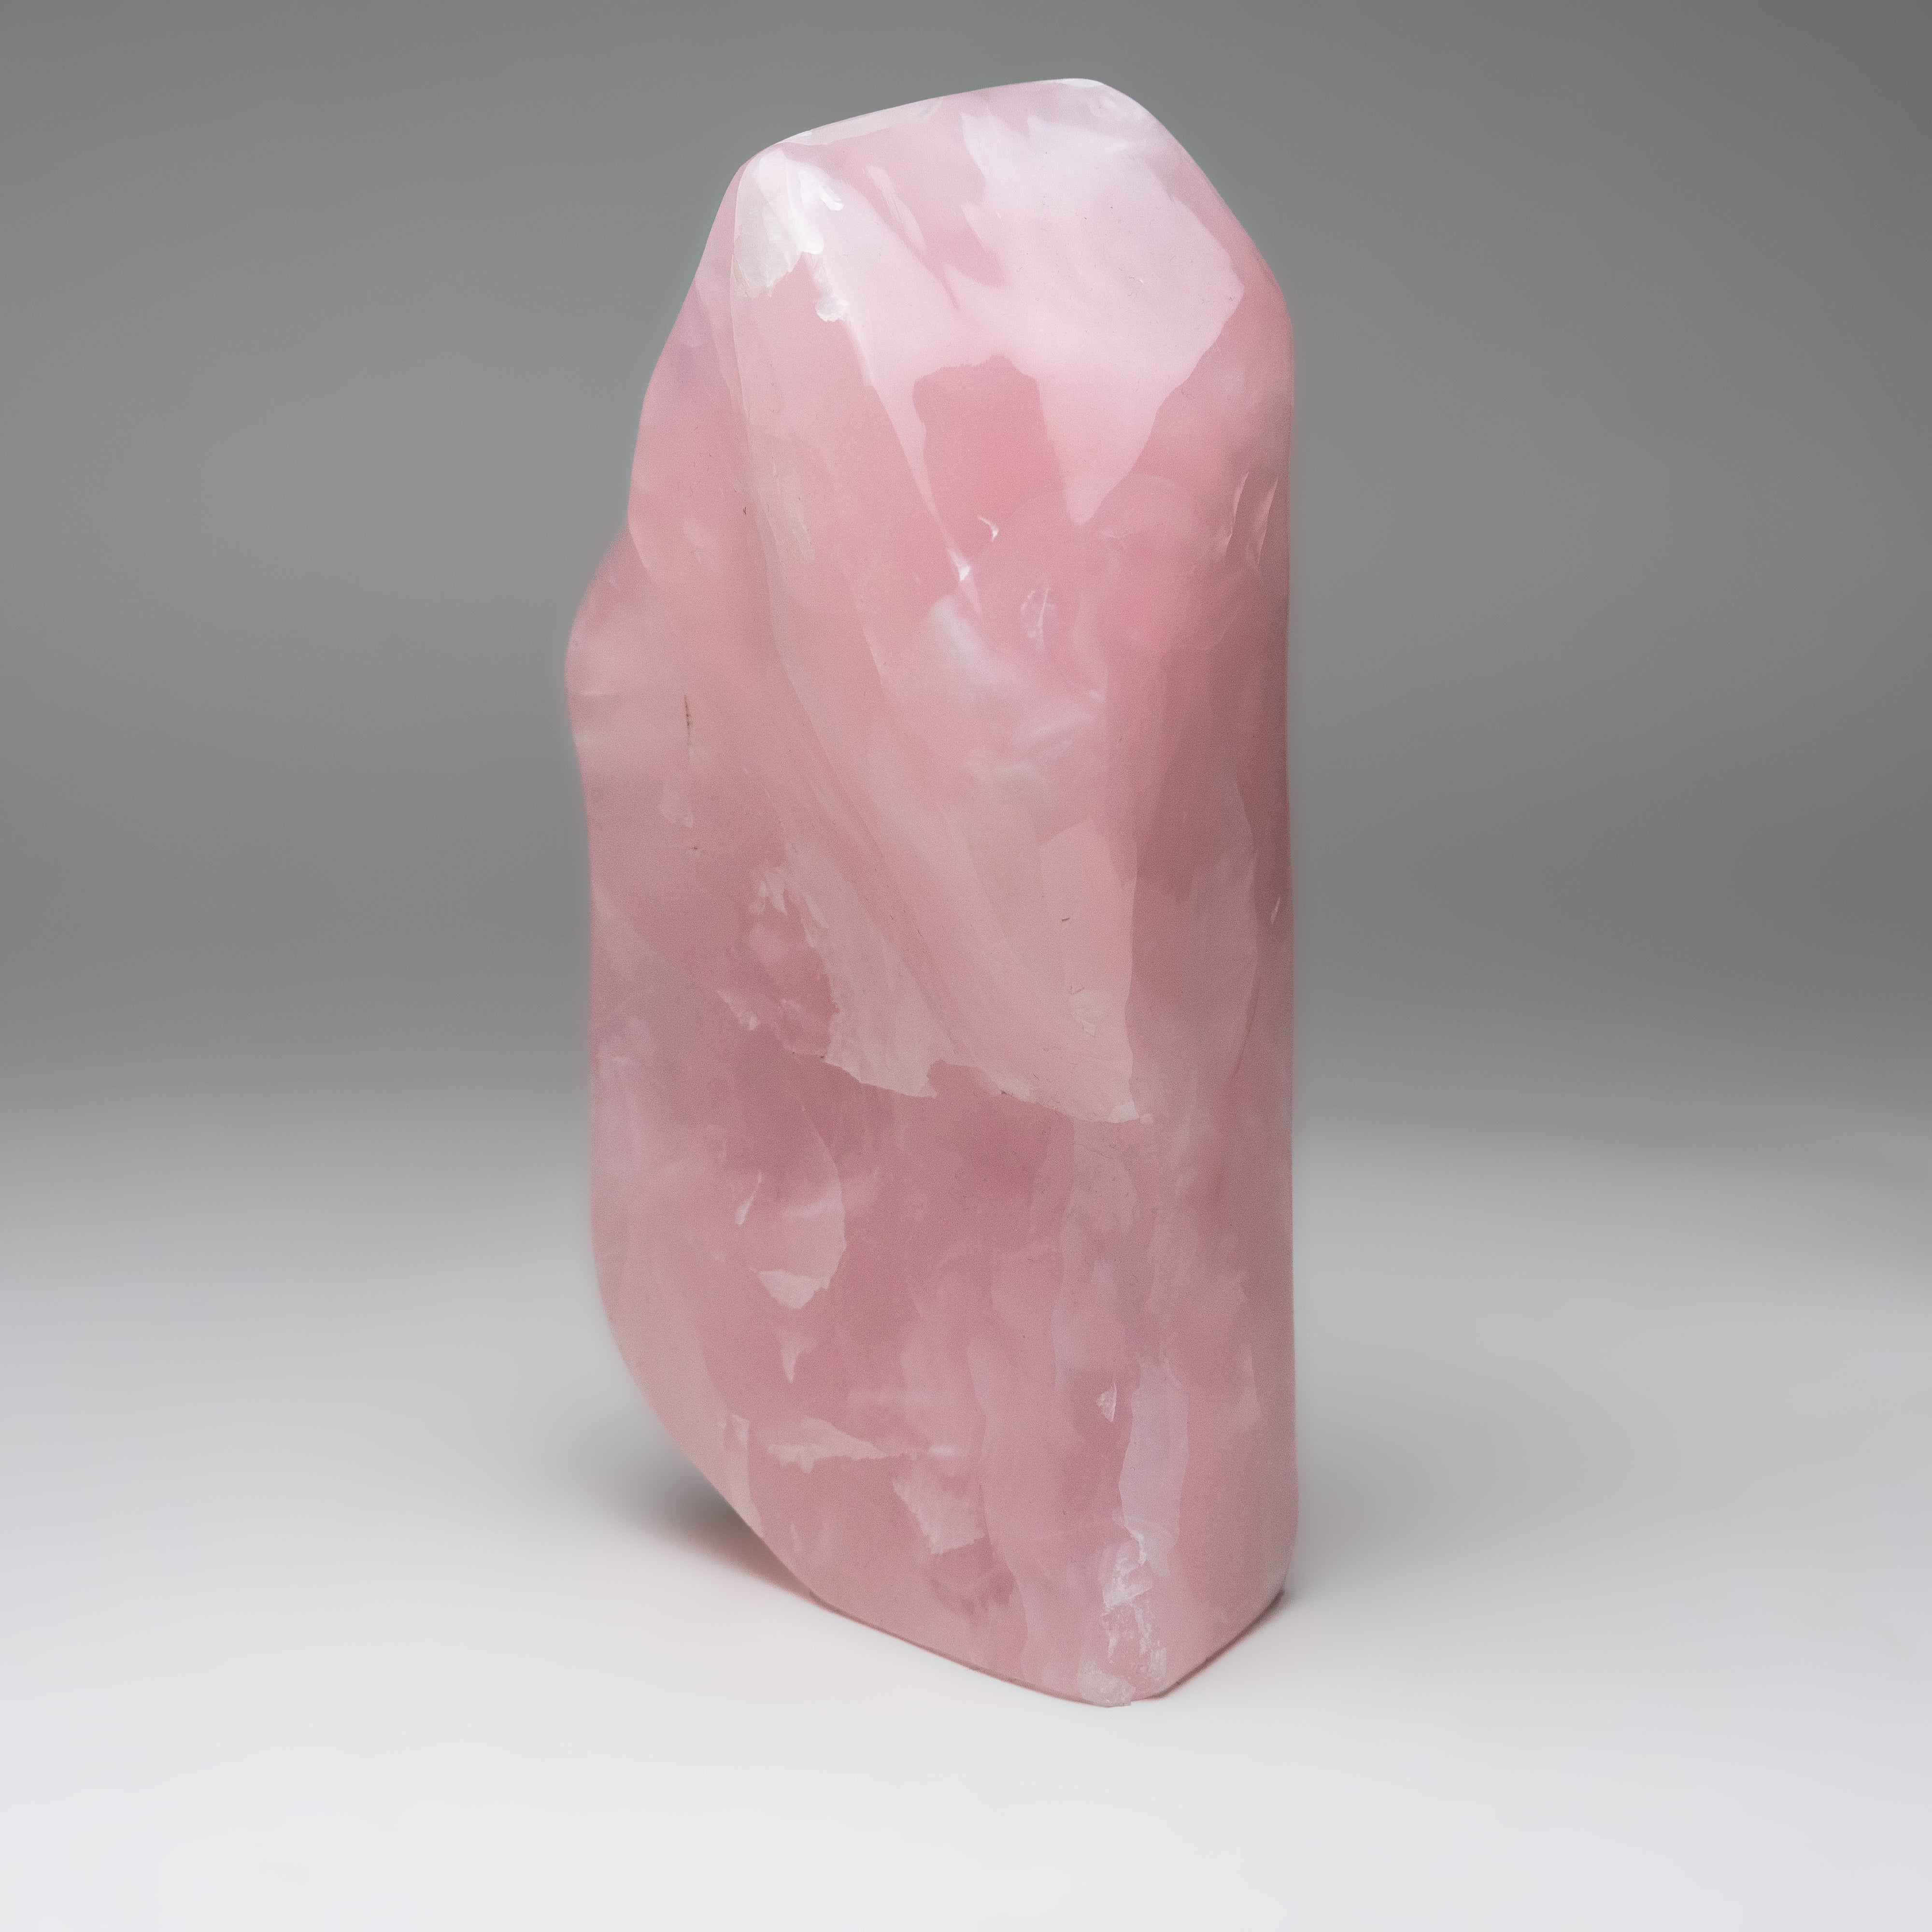 Polished Pink Mangano Calcite from Pakistan (5.5 lbs)